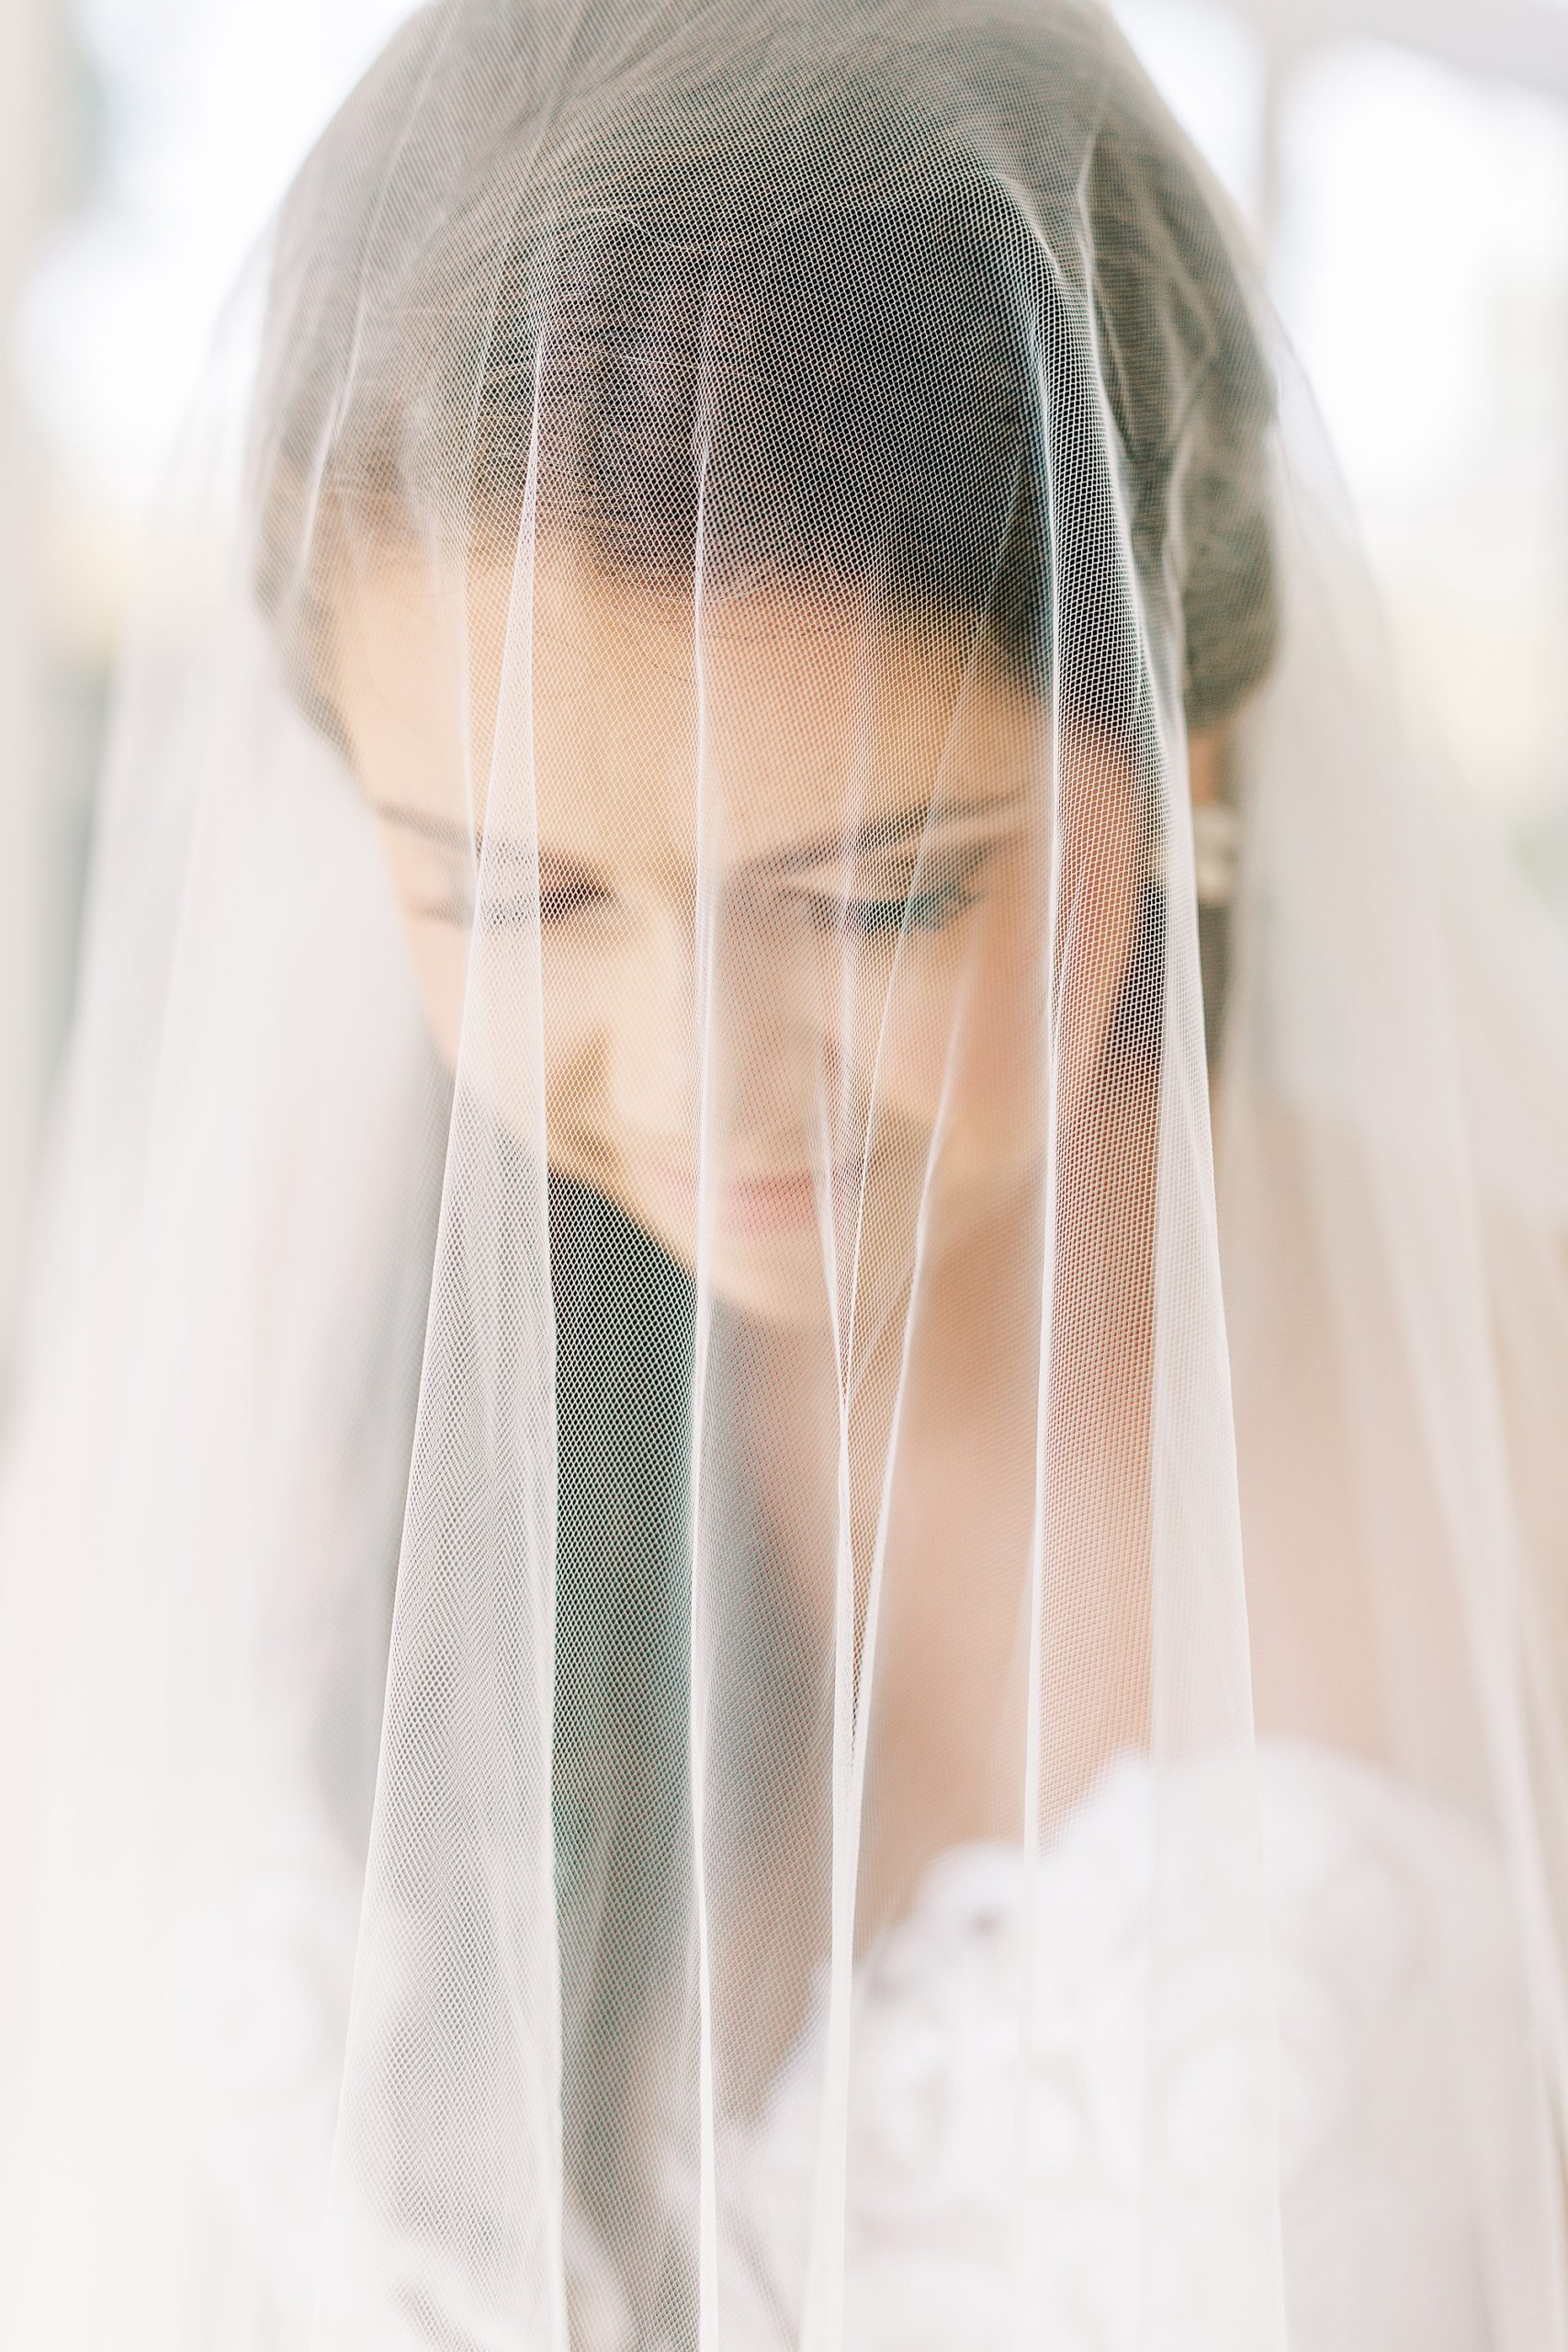 bride looks down with veil over her face